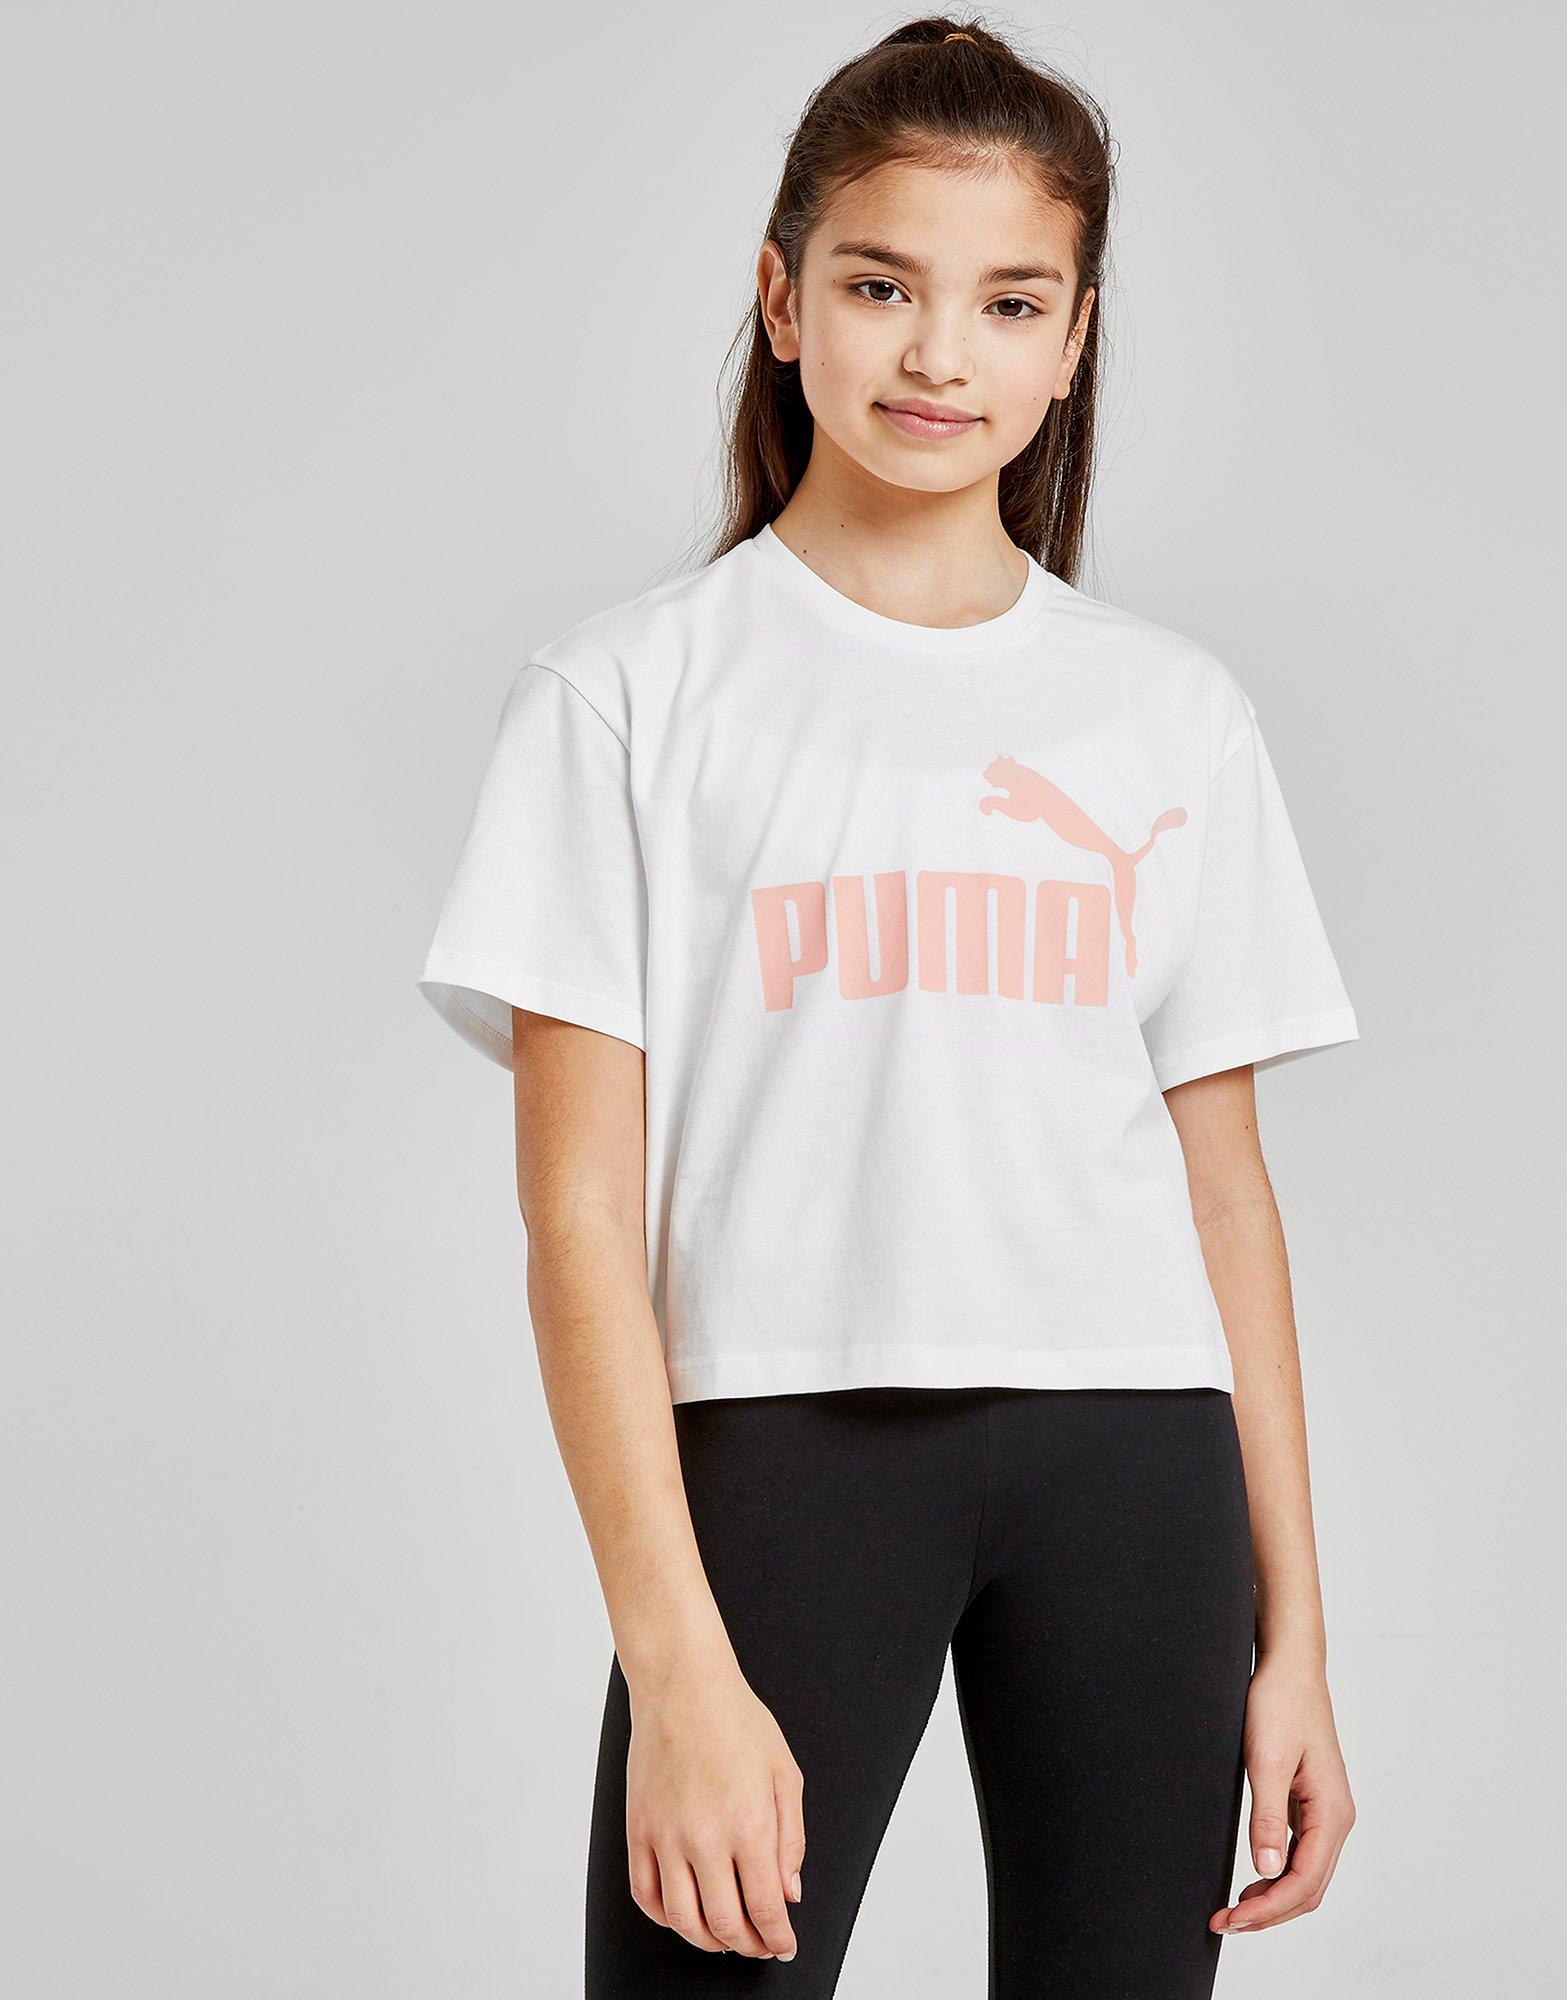 puma clothing south africa contact details